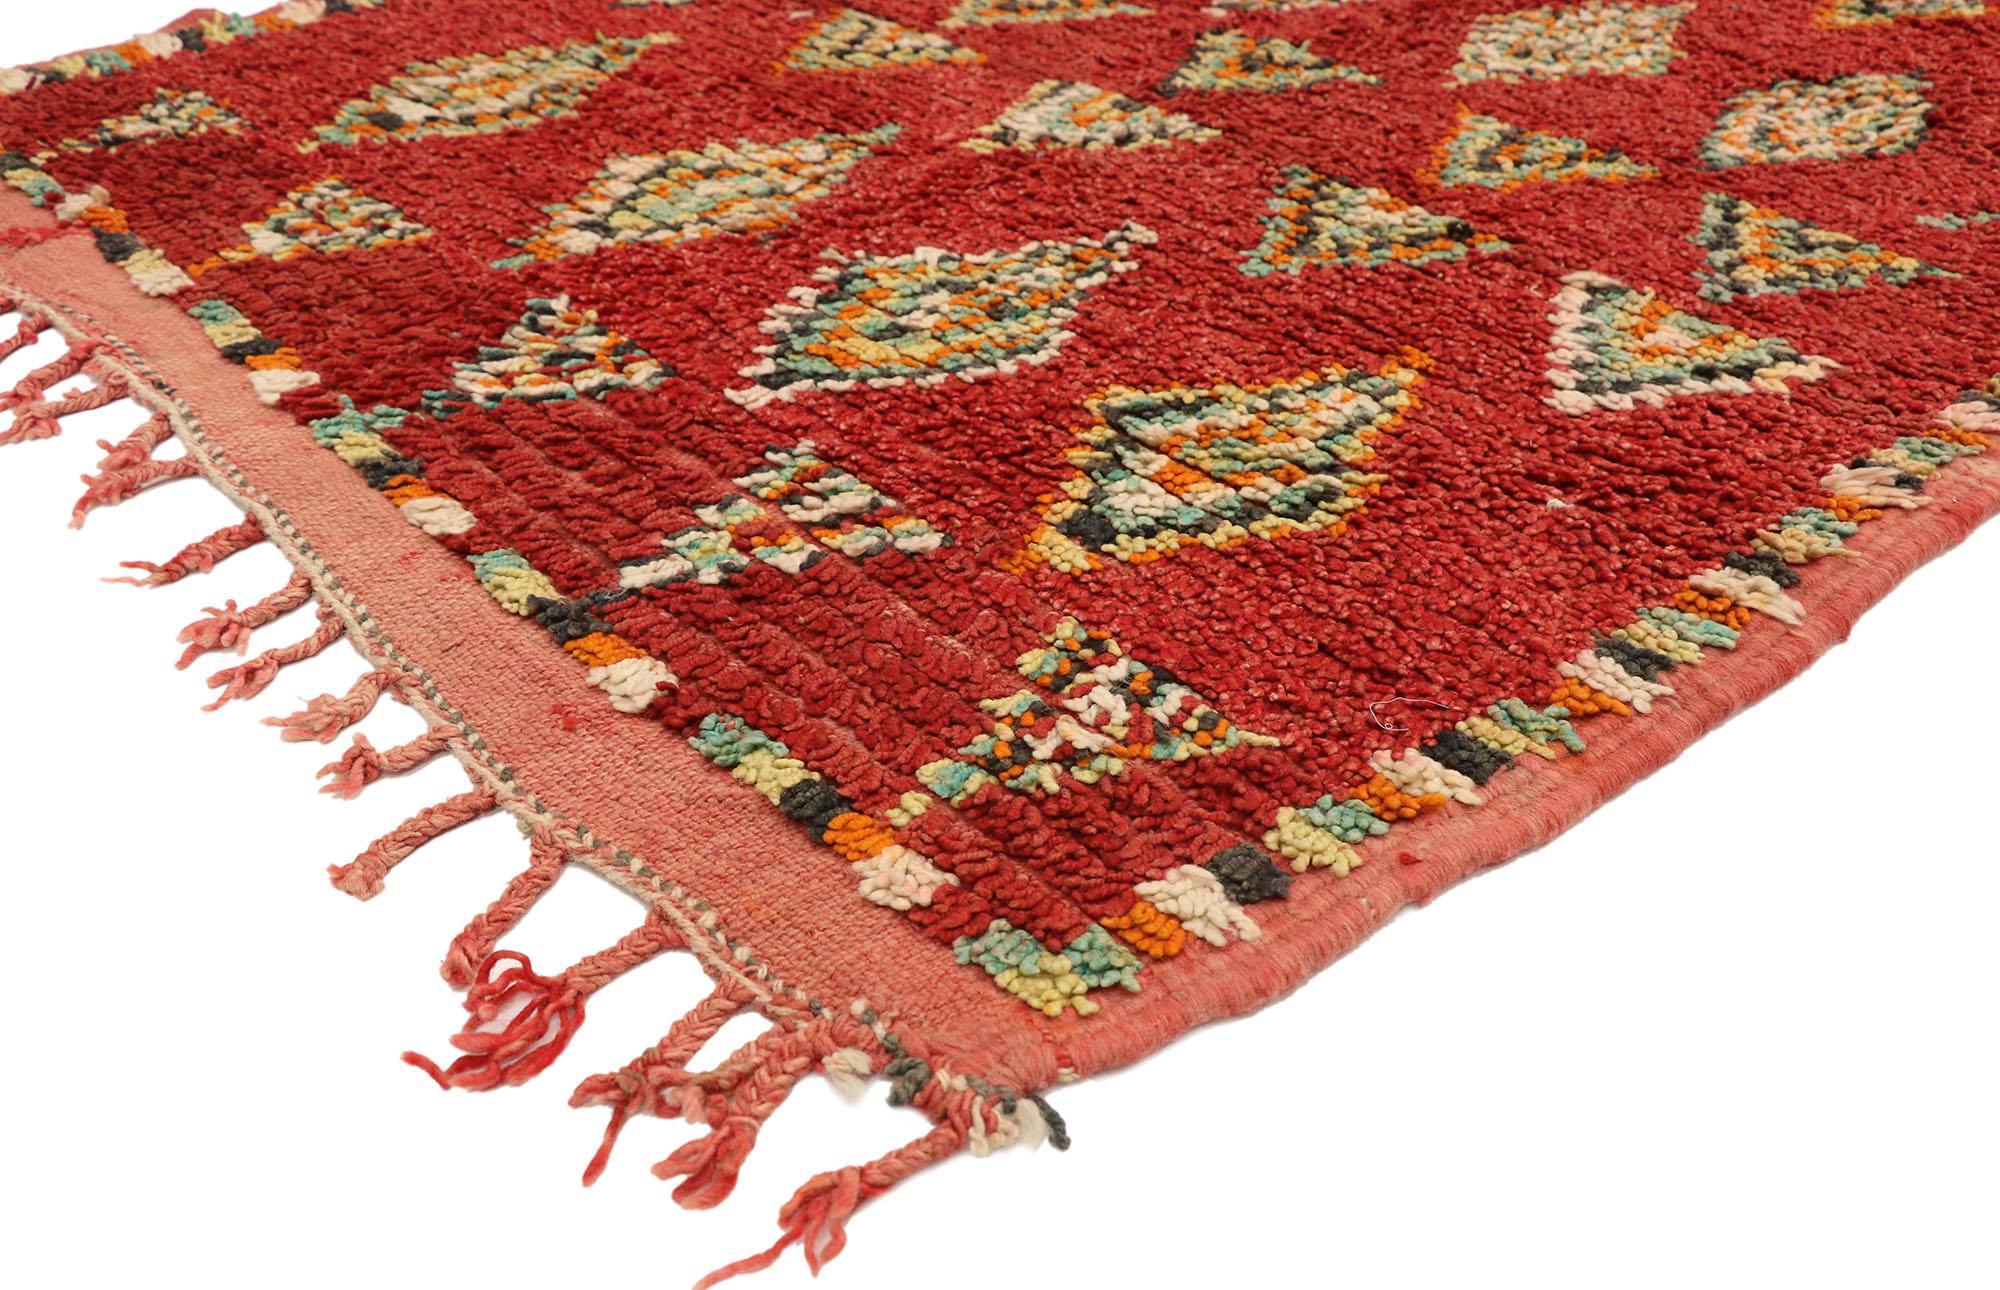 20168 Vintage Red Moroccan Azilal Rug Runner, 04’00 x 12’01. Red Moroccan Azilal rugs stand as exquisite examples of traditional Moroccan craftsmanship, meticulously fashioned by adept Berber artisans hailing from the Azilal region of Morocco. What